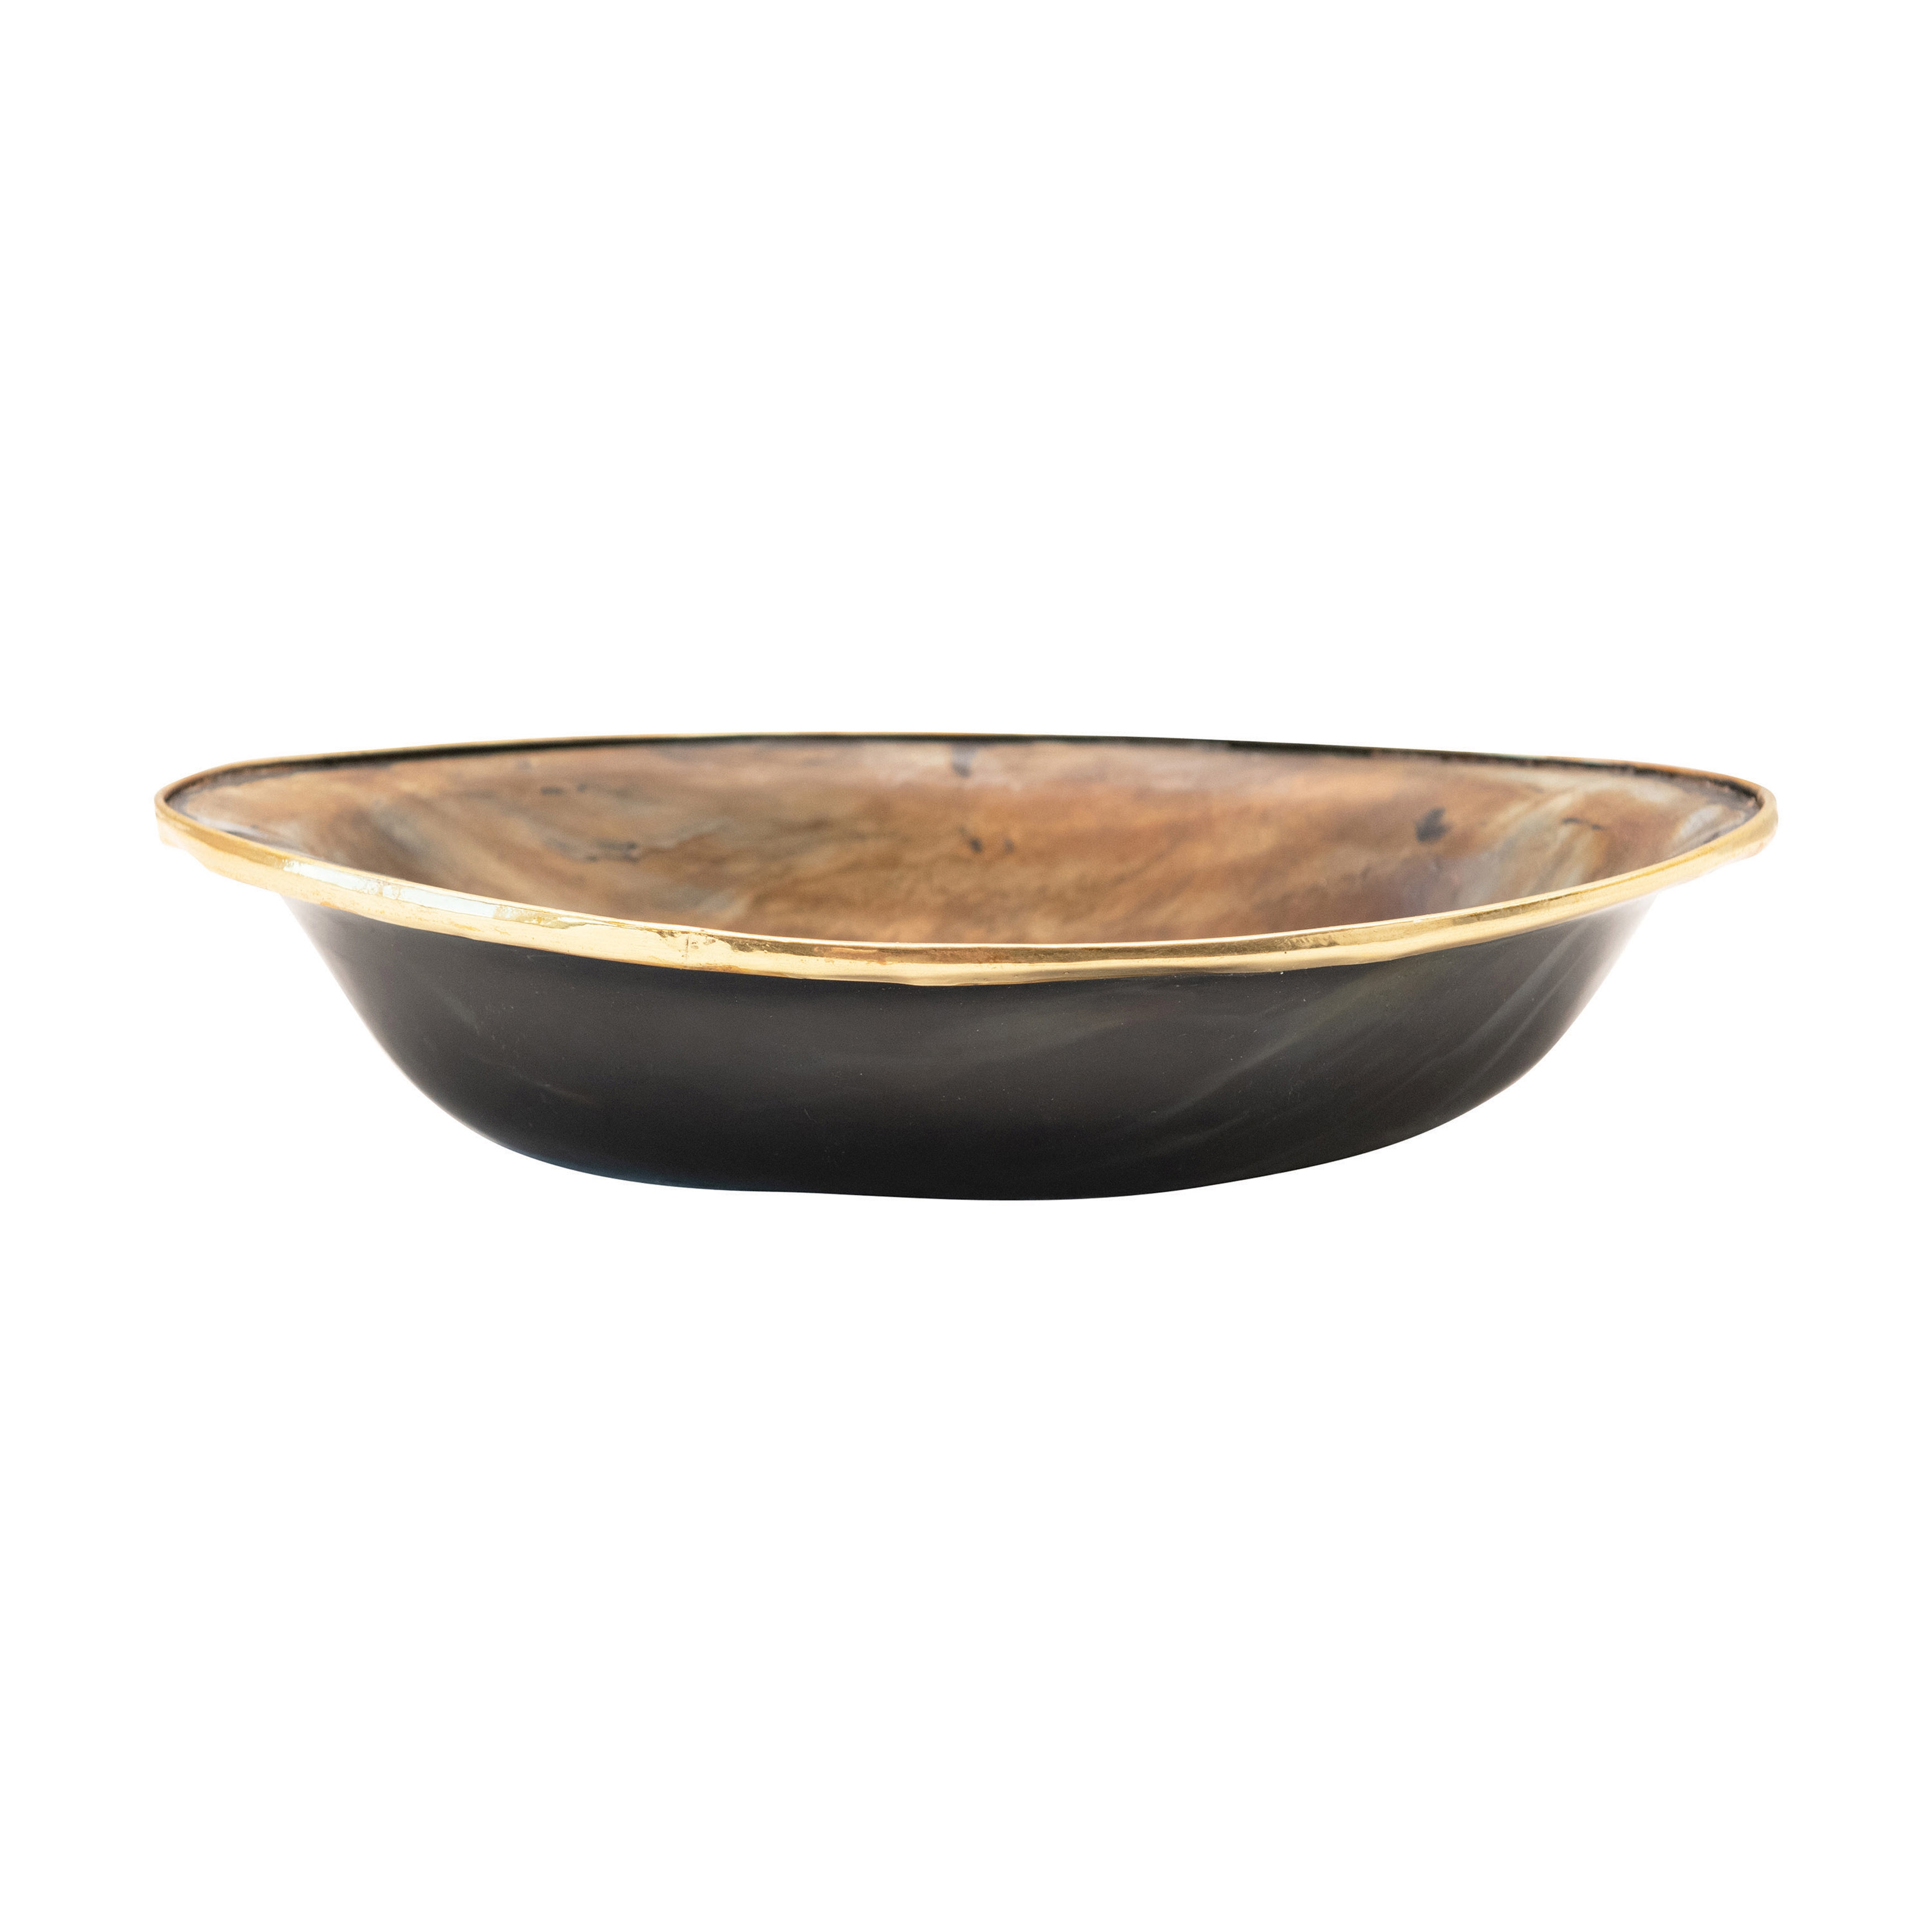 Horn Bowl with Brass Rim (Each One Will Vary) - Image 0